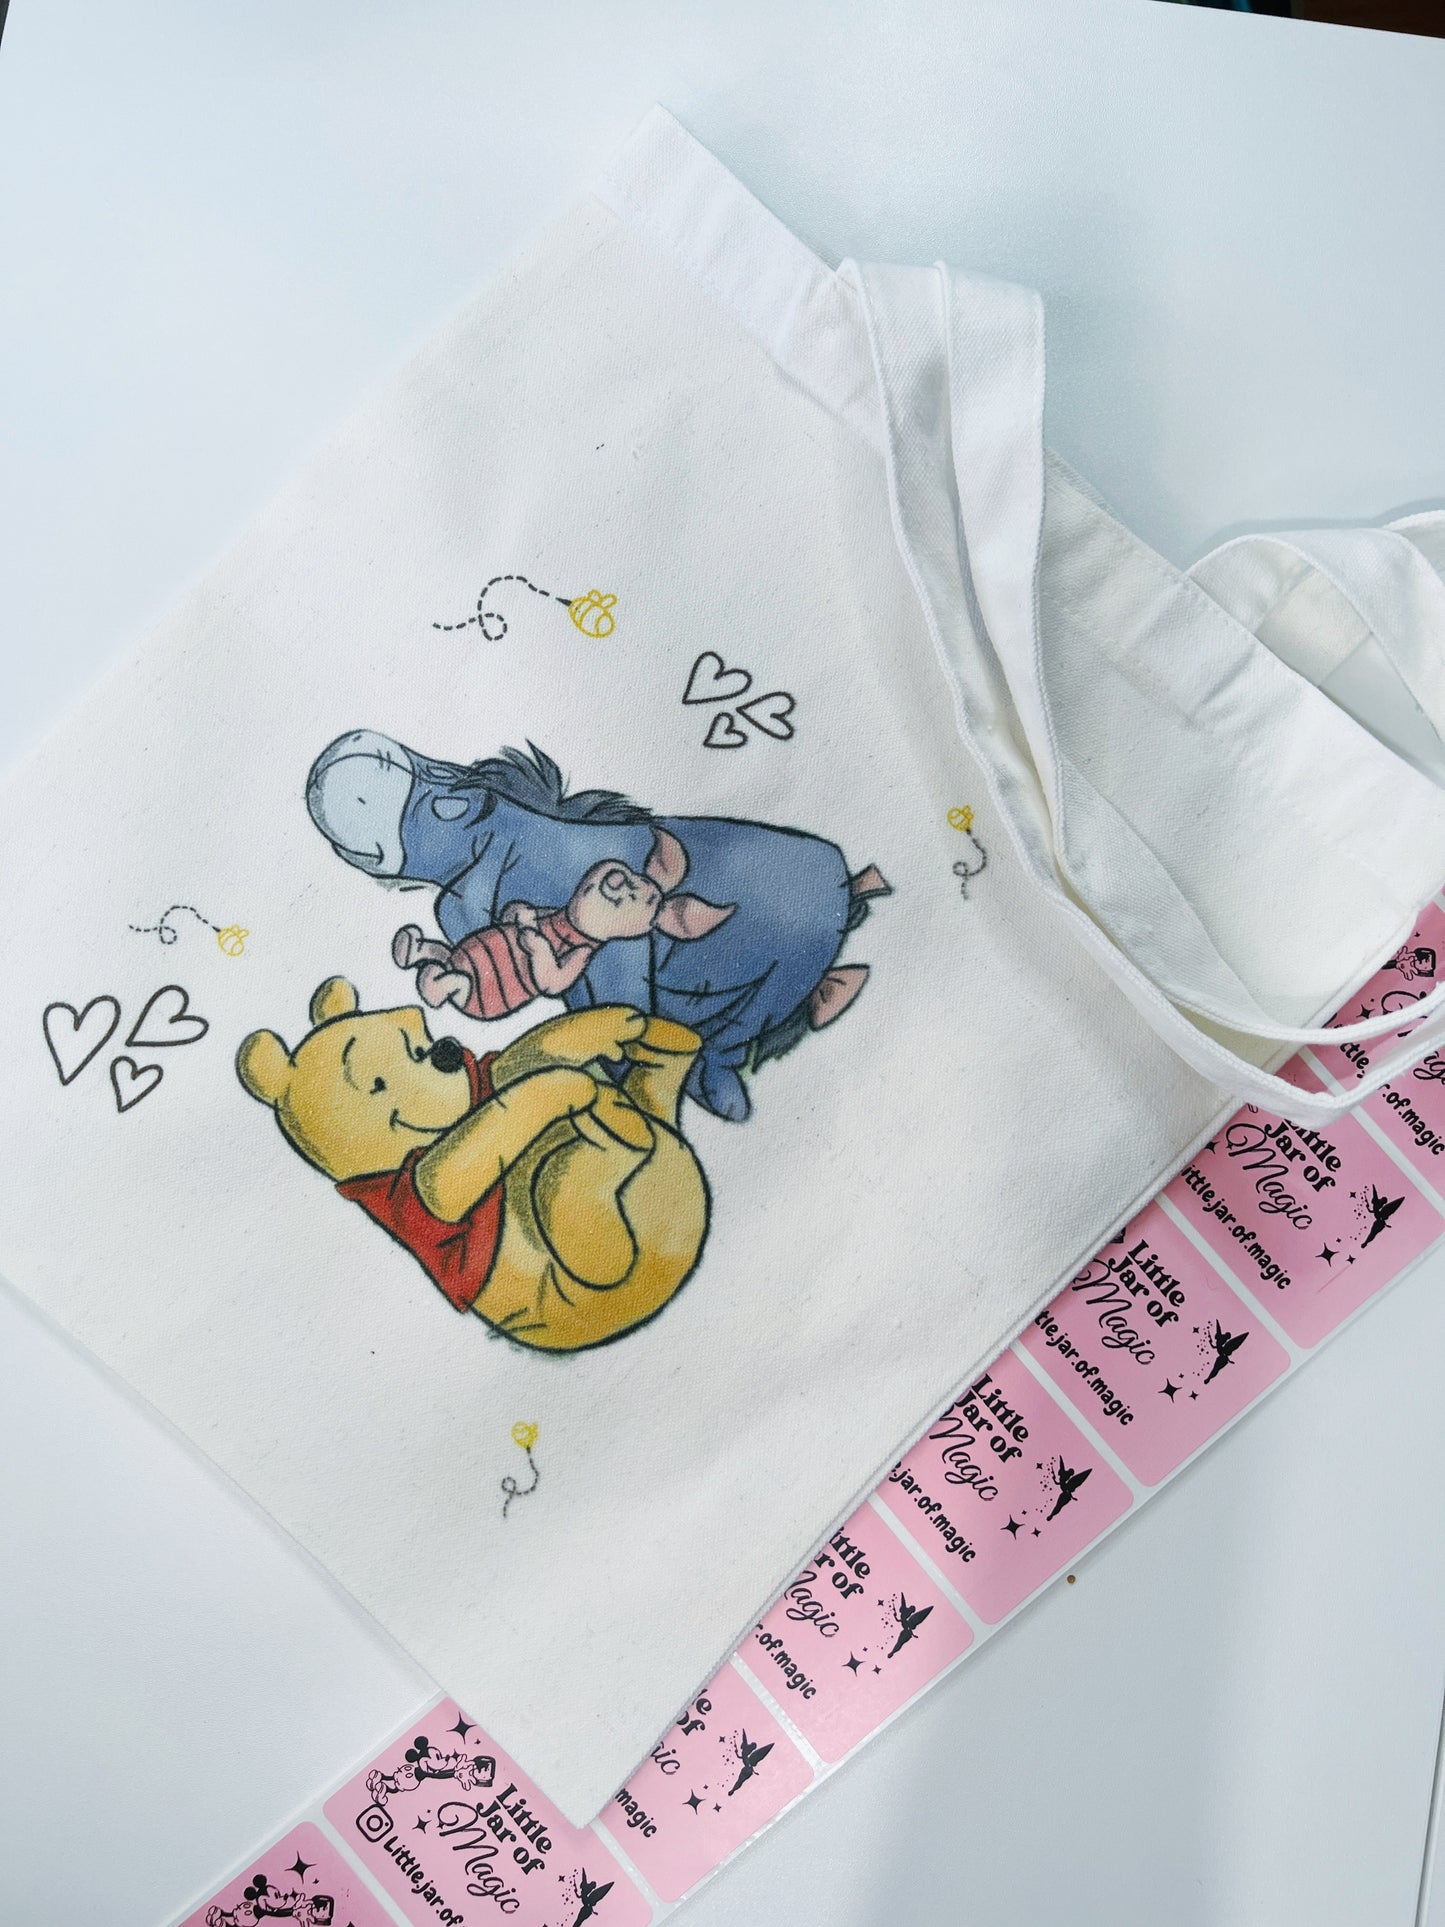 Pooh & Friends tote